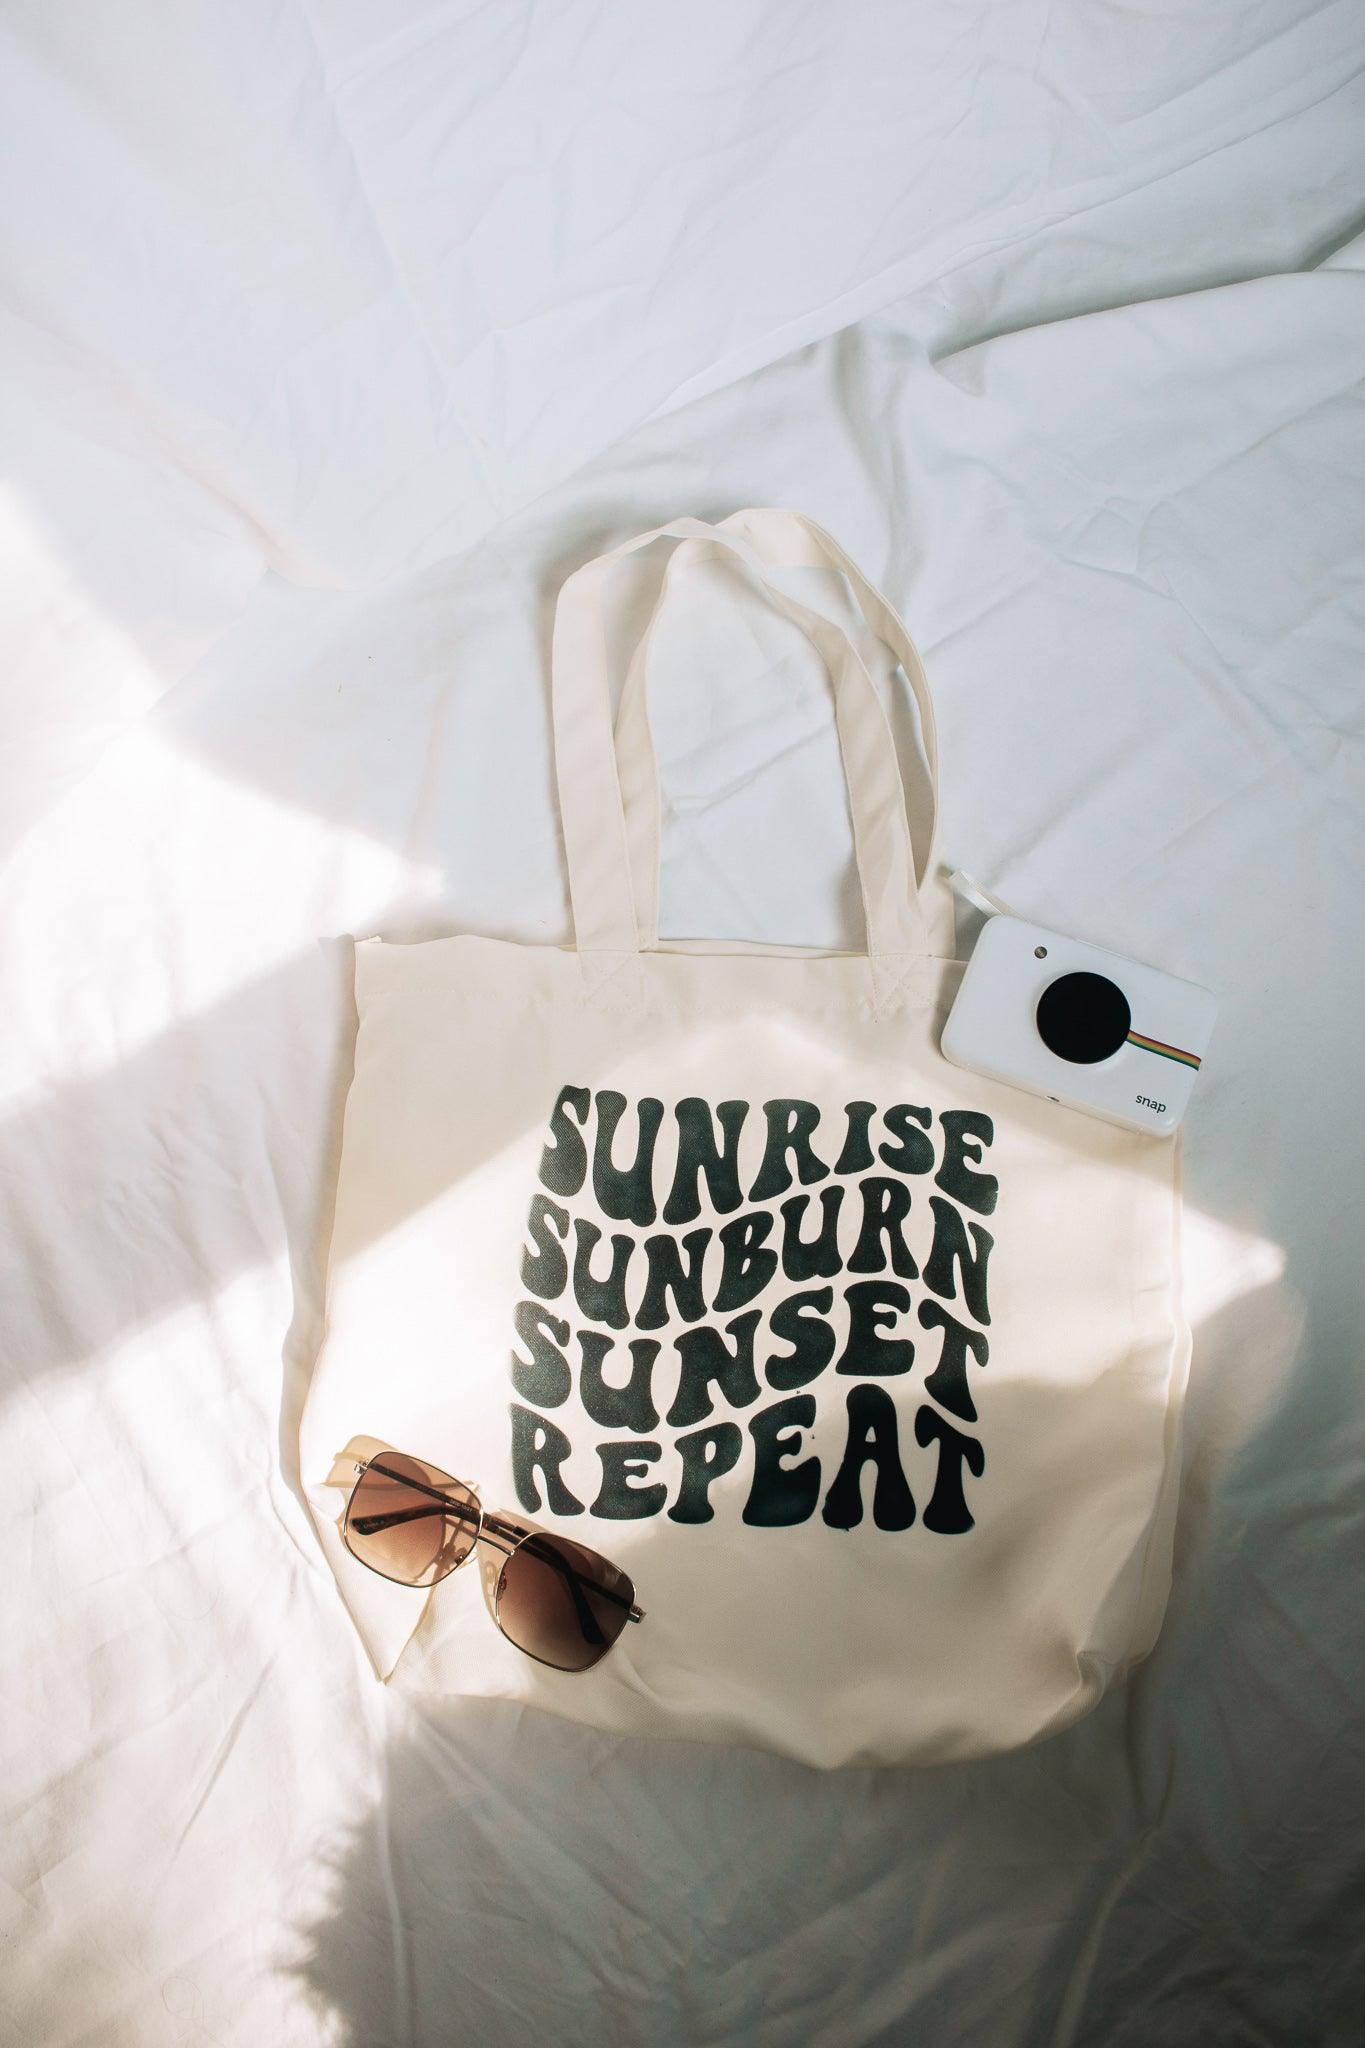 A portrait photo of a beige tote bag laying on a white sheet. The bag says sunrise, sunburn, sunset, repeat in groovy text. There is a polaroid camera and sunglasses laying on and around the bag for styling.